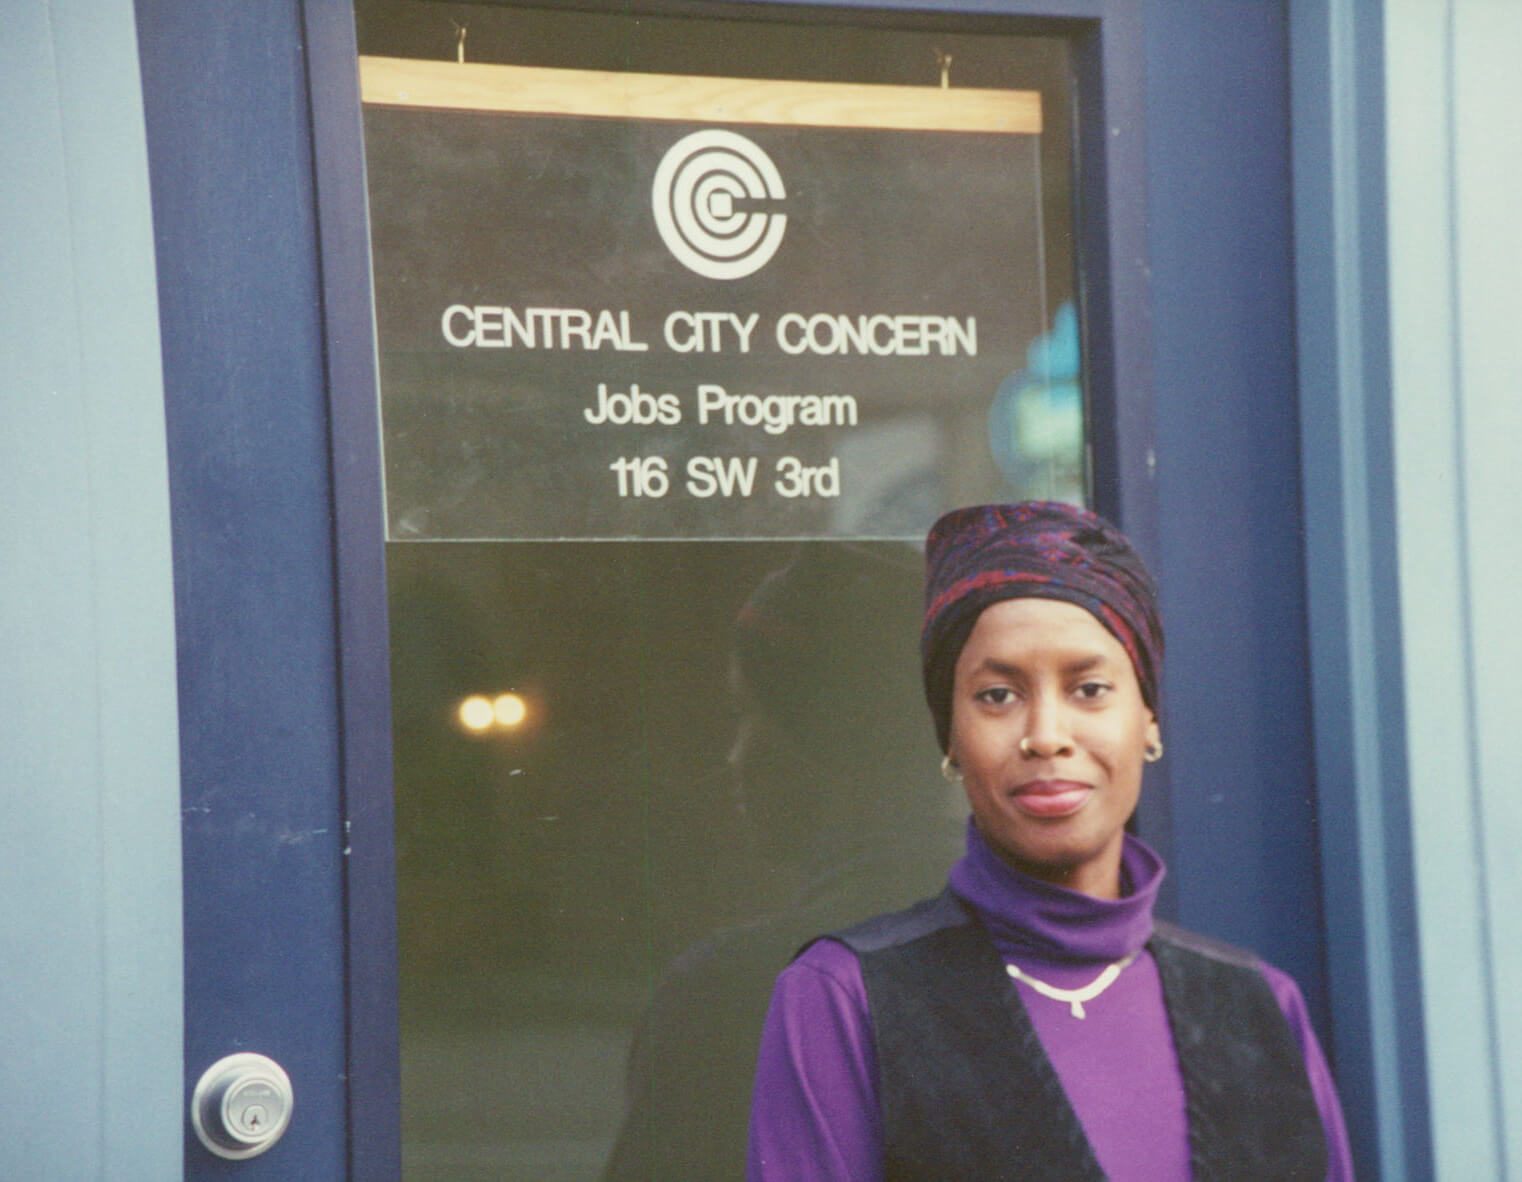 Woman standing in front of CCC job program sign in the 90s